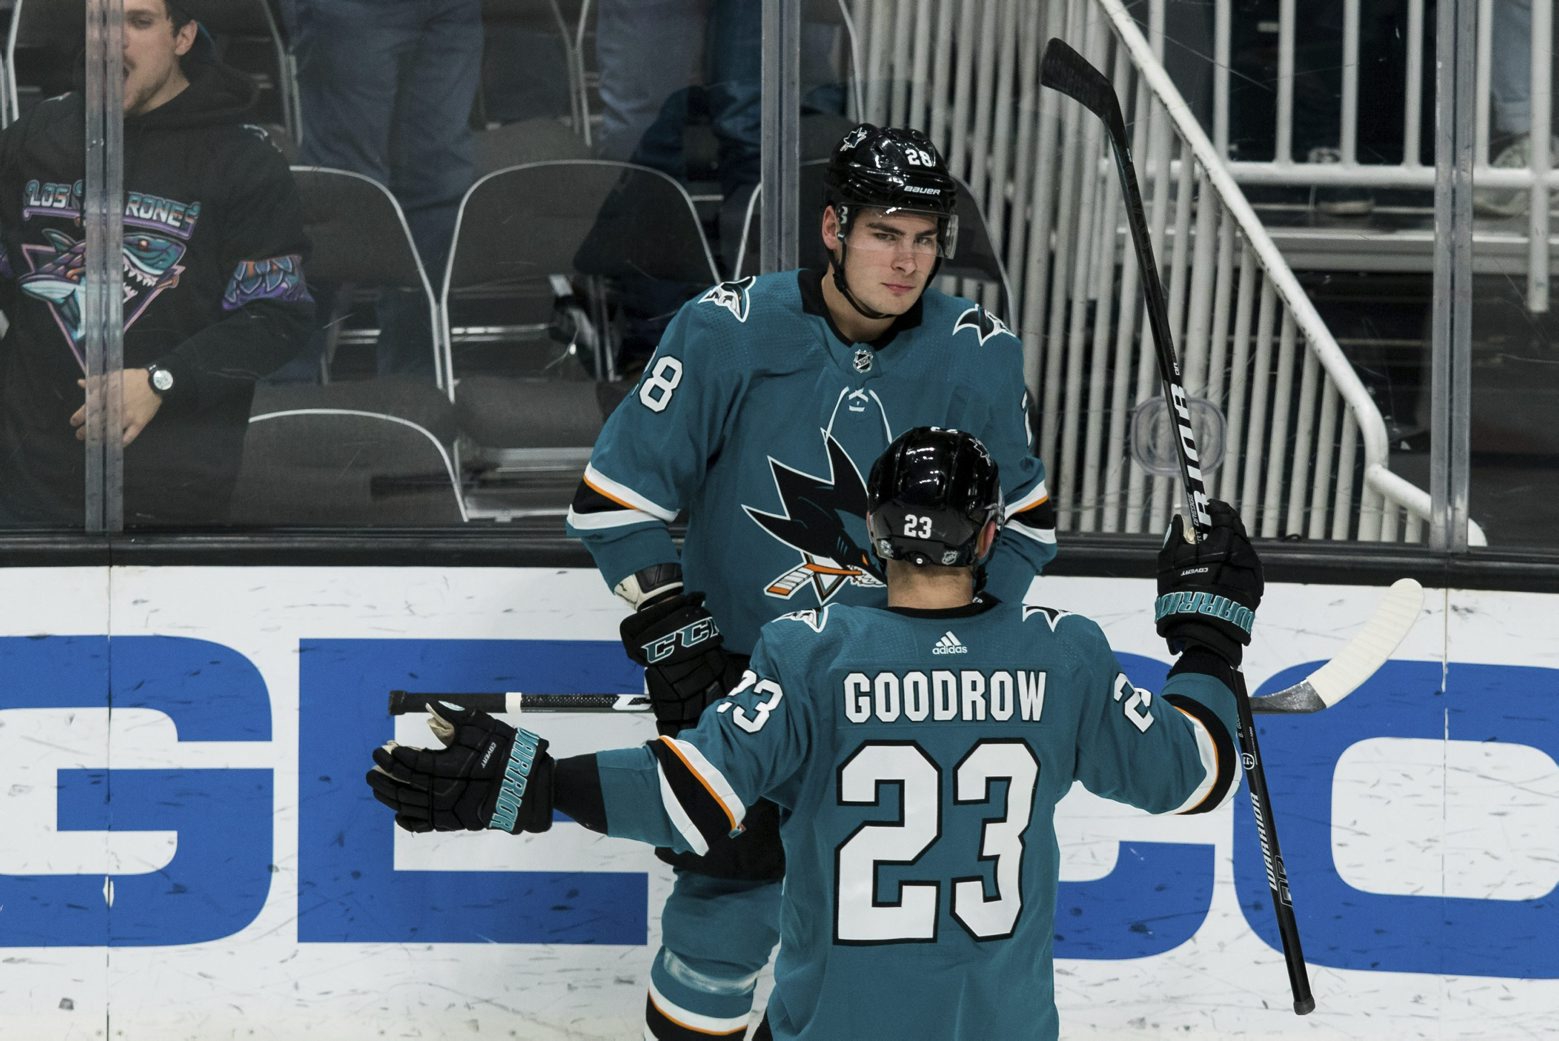 San Jose Sharks right wing Timo Meier (28) celebrates with Barclay Goodrow (23) after scoring his second goal of the night against the Philadelphia Flyers during the third period of an NHL hockey game in San Jose, Calif., Saturday, Dec. 28, 2019. The Sharks won 6-1. (AP Photo/John Hefti) Flyers Sharks Hockey